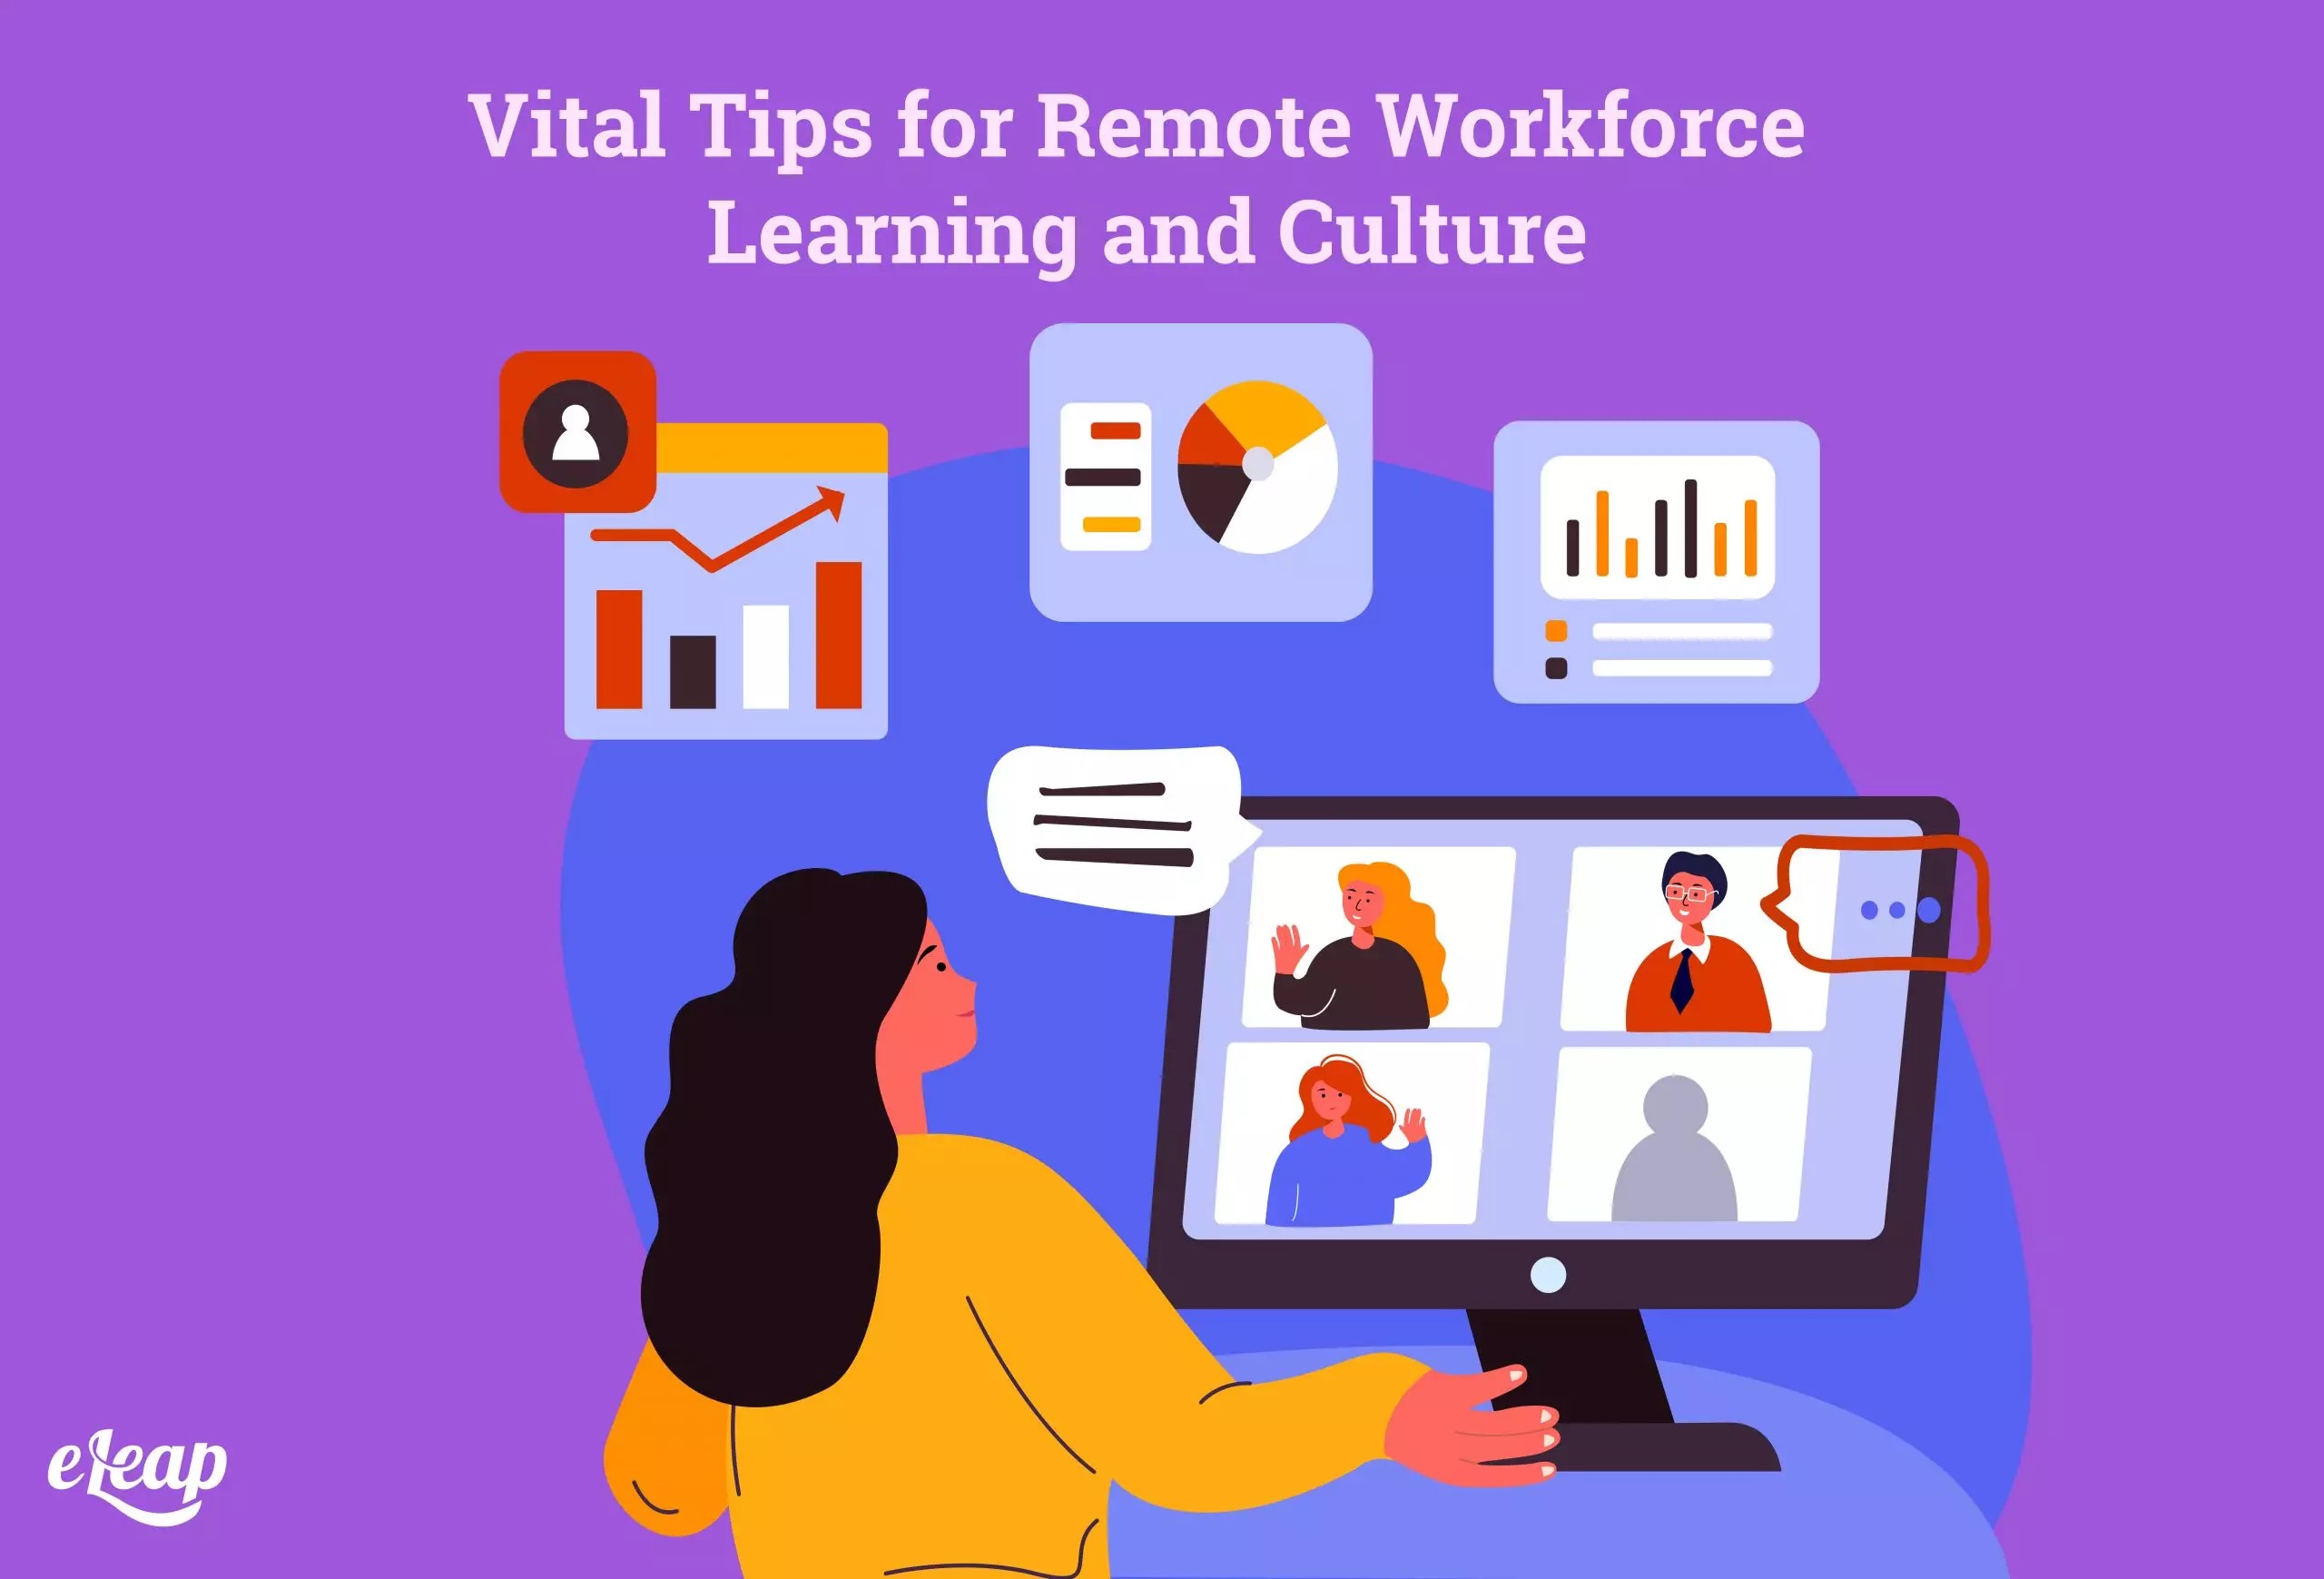 Vital Tips for Remote Workforce Learning and Culture